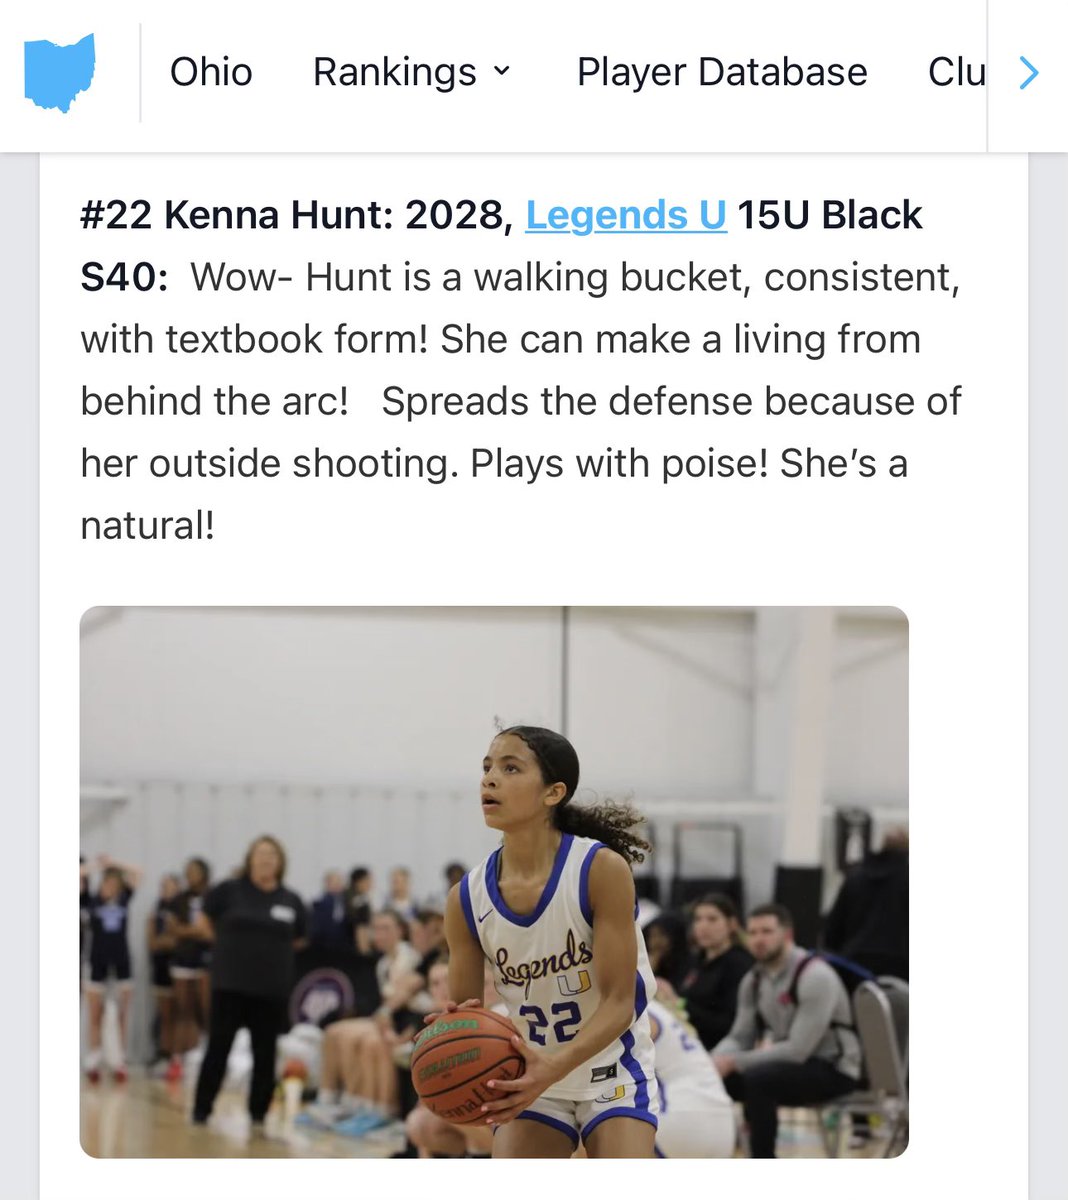 Thank you for the write up! @PGH_Ohio @Legends_Bball #BTA